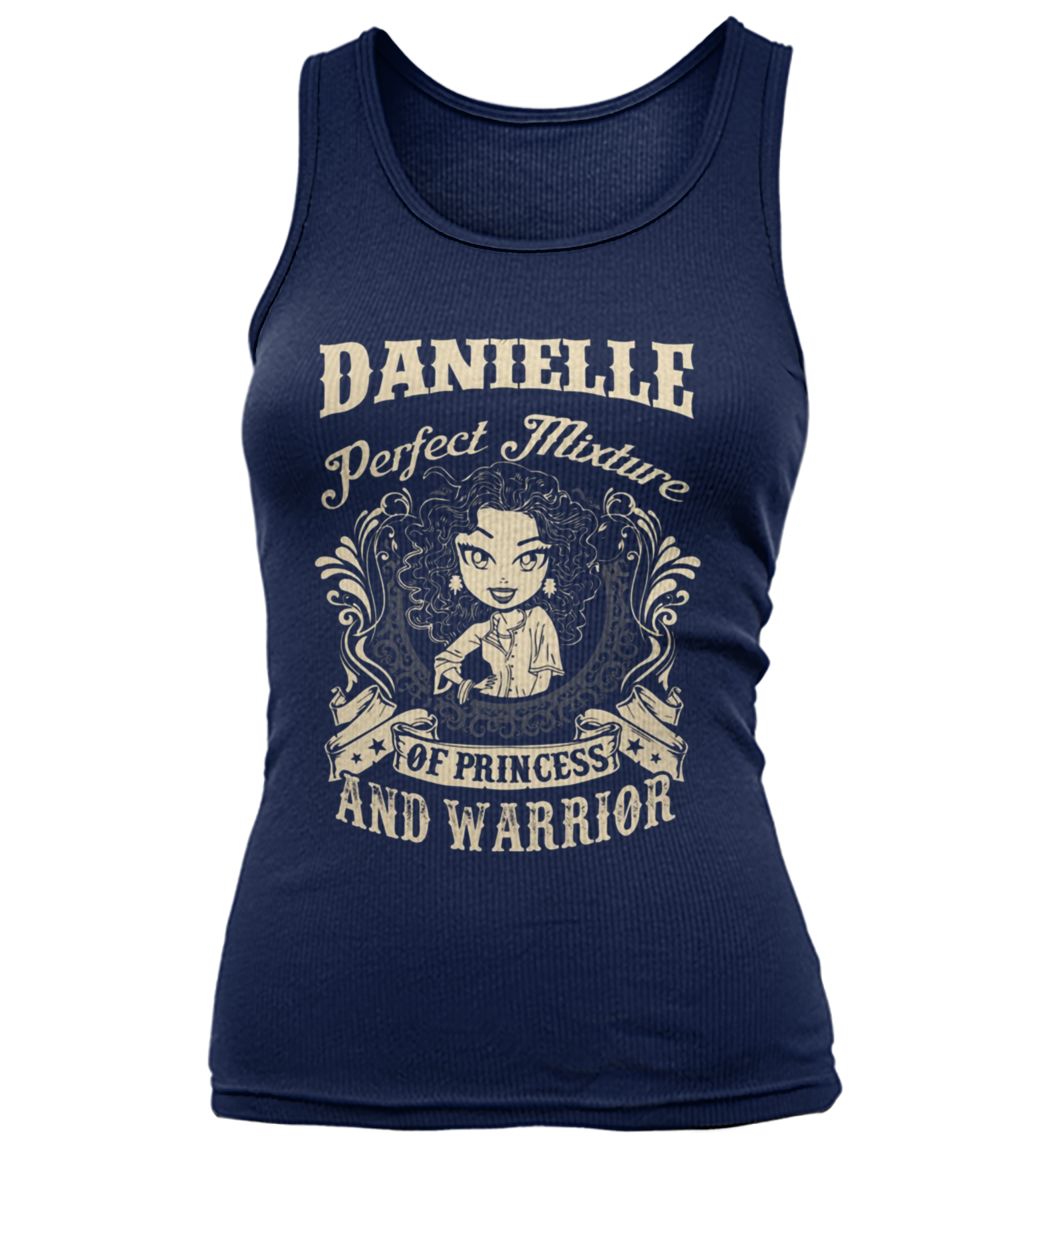 Danielle perfect combination of a princess and warrior women's tank top